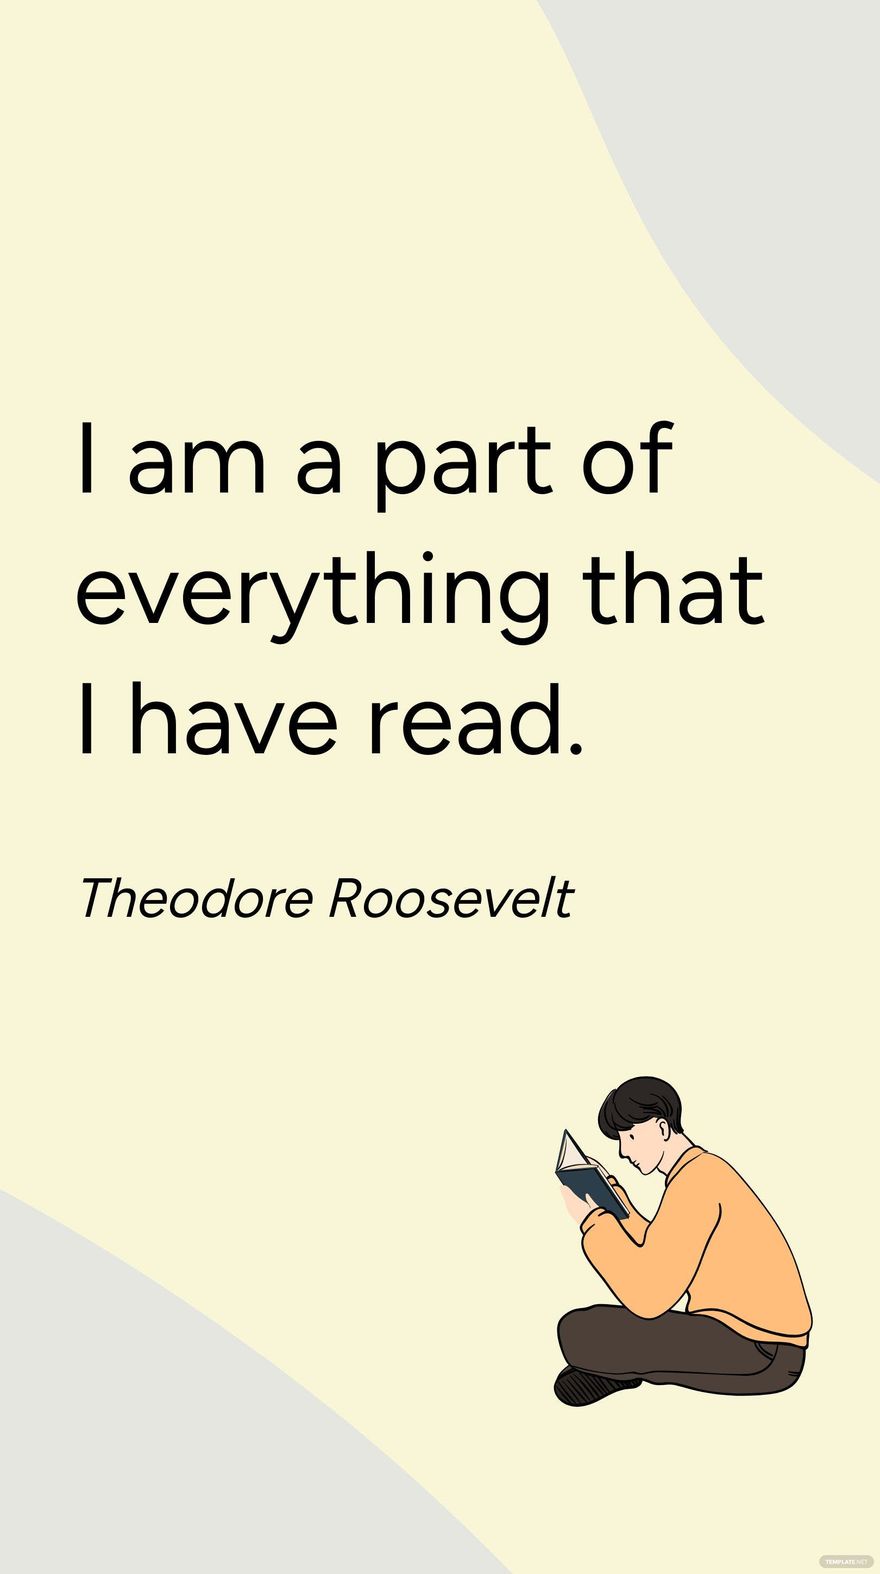 Free Theodore Roosevelt -I am a part of everything that I have read. in JPG